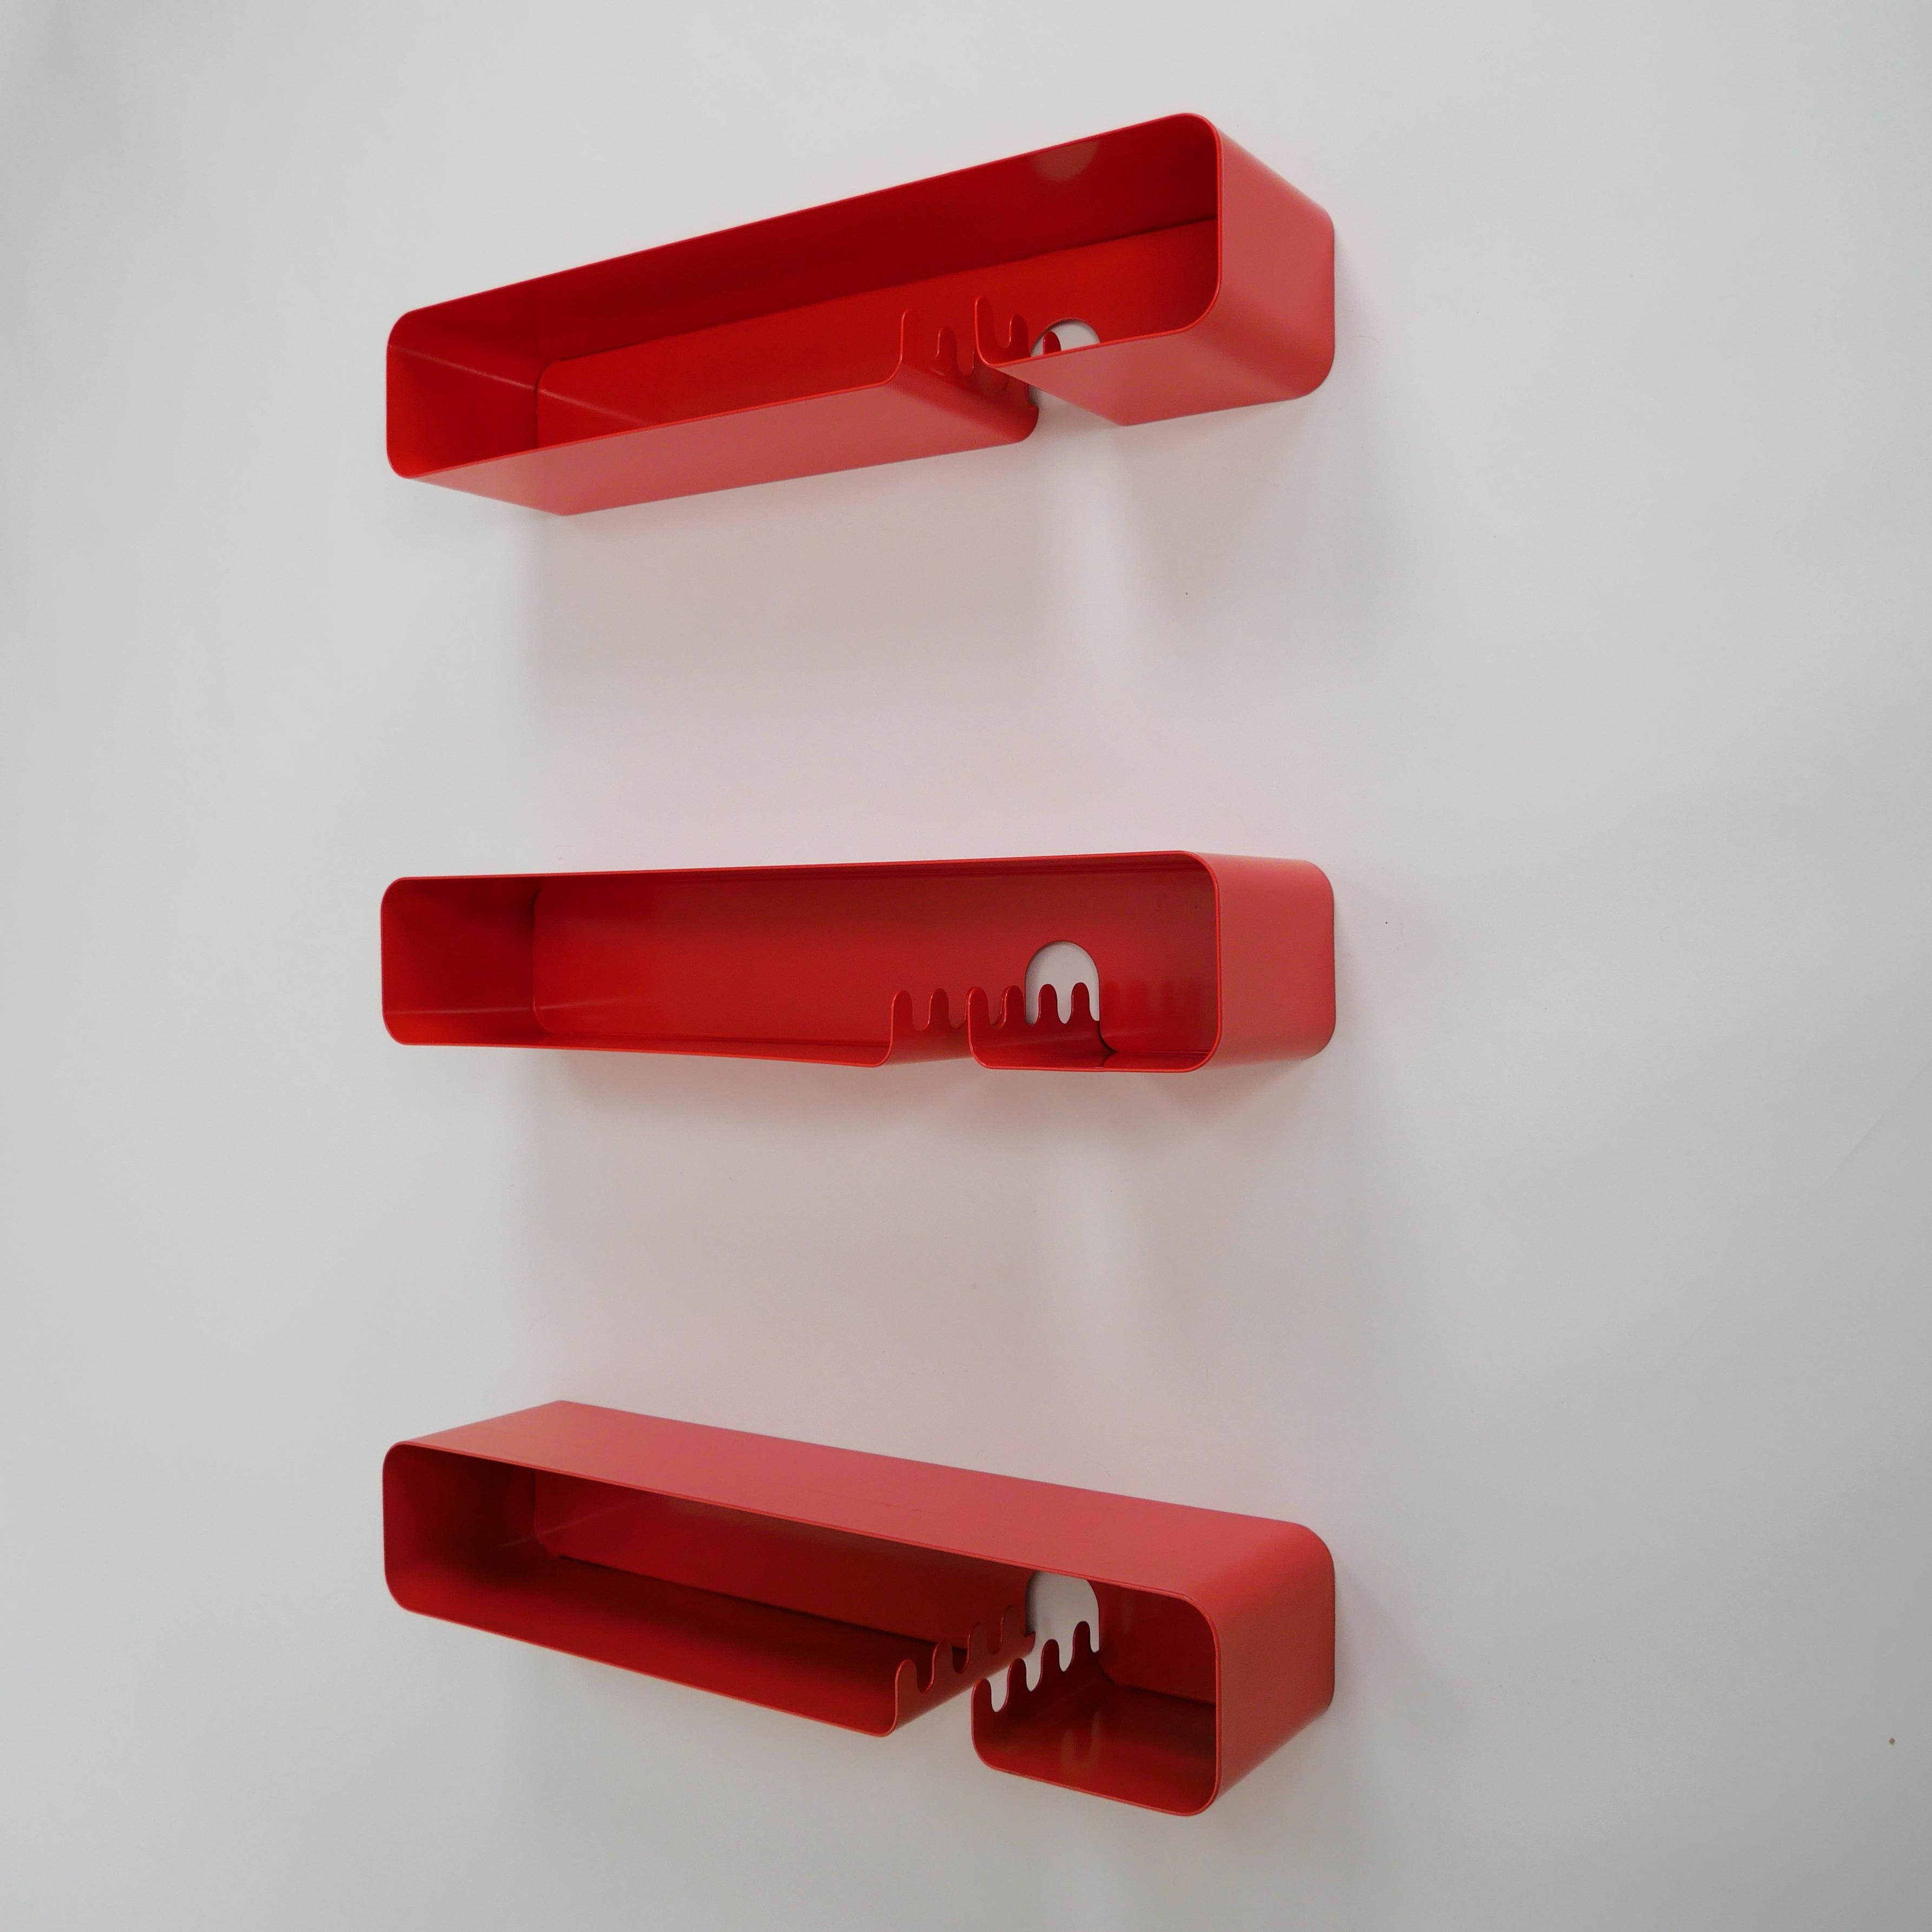 Habitat Pop Shelf & Hanger, 1970s, Red Metal, for Bathroom, Entrance, 3 Avail In Excellent Condition For Sale In London, GB